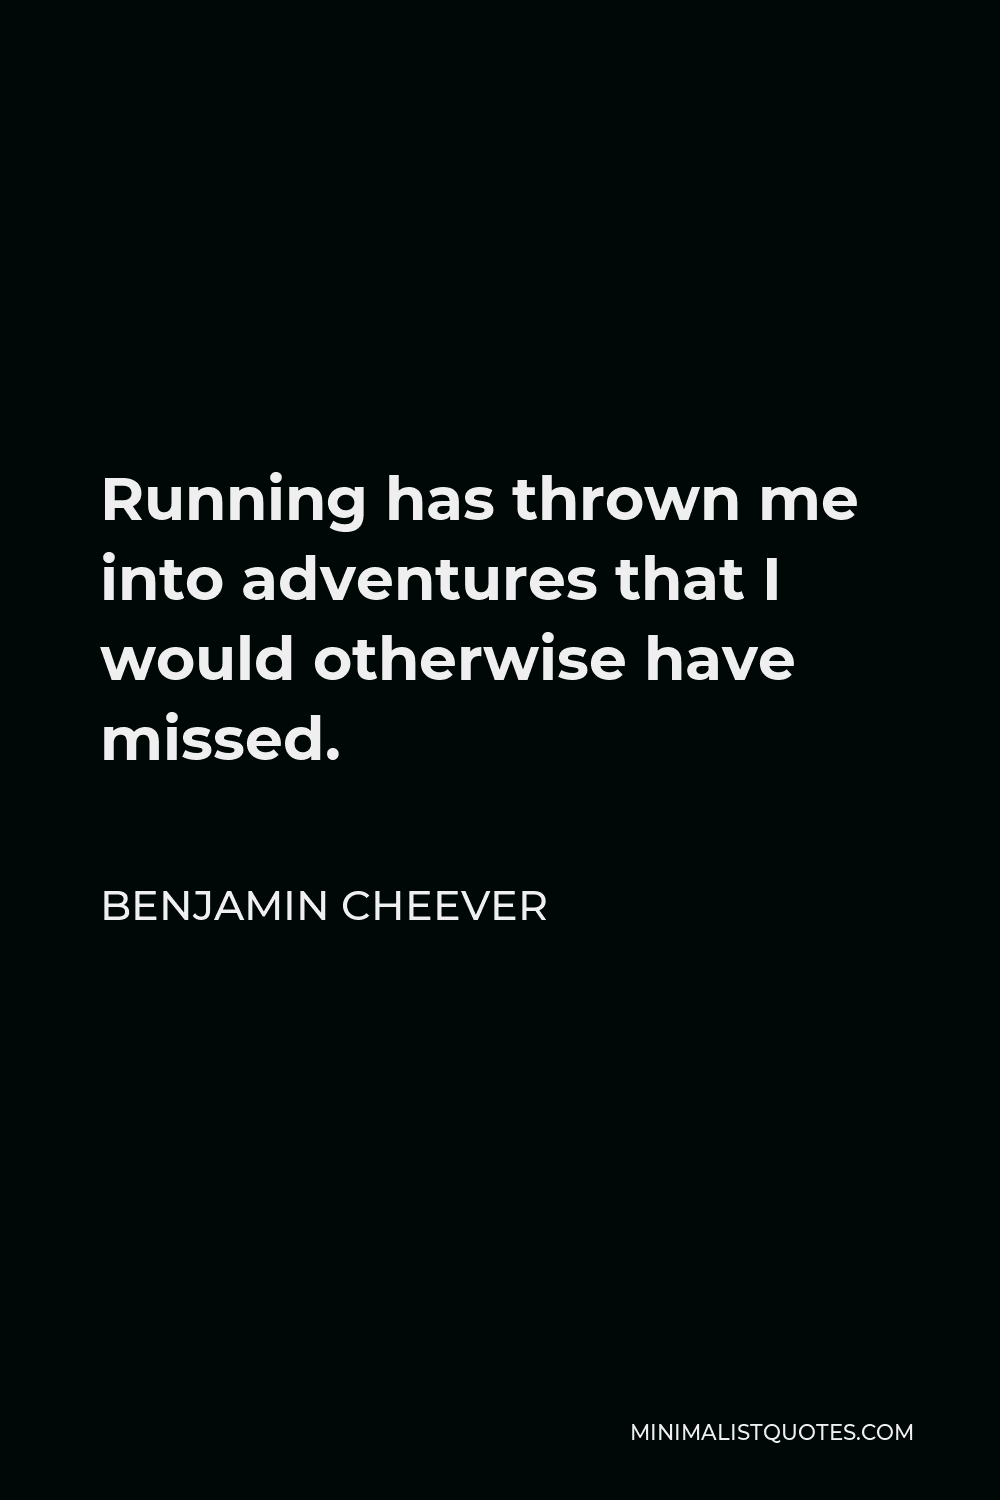 Benjamin Cheever Quote - Running has thrown me into adventures that I would otherwise have missed.